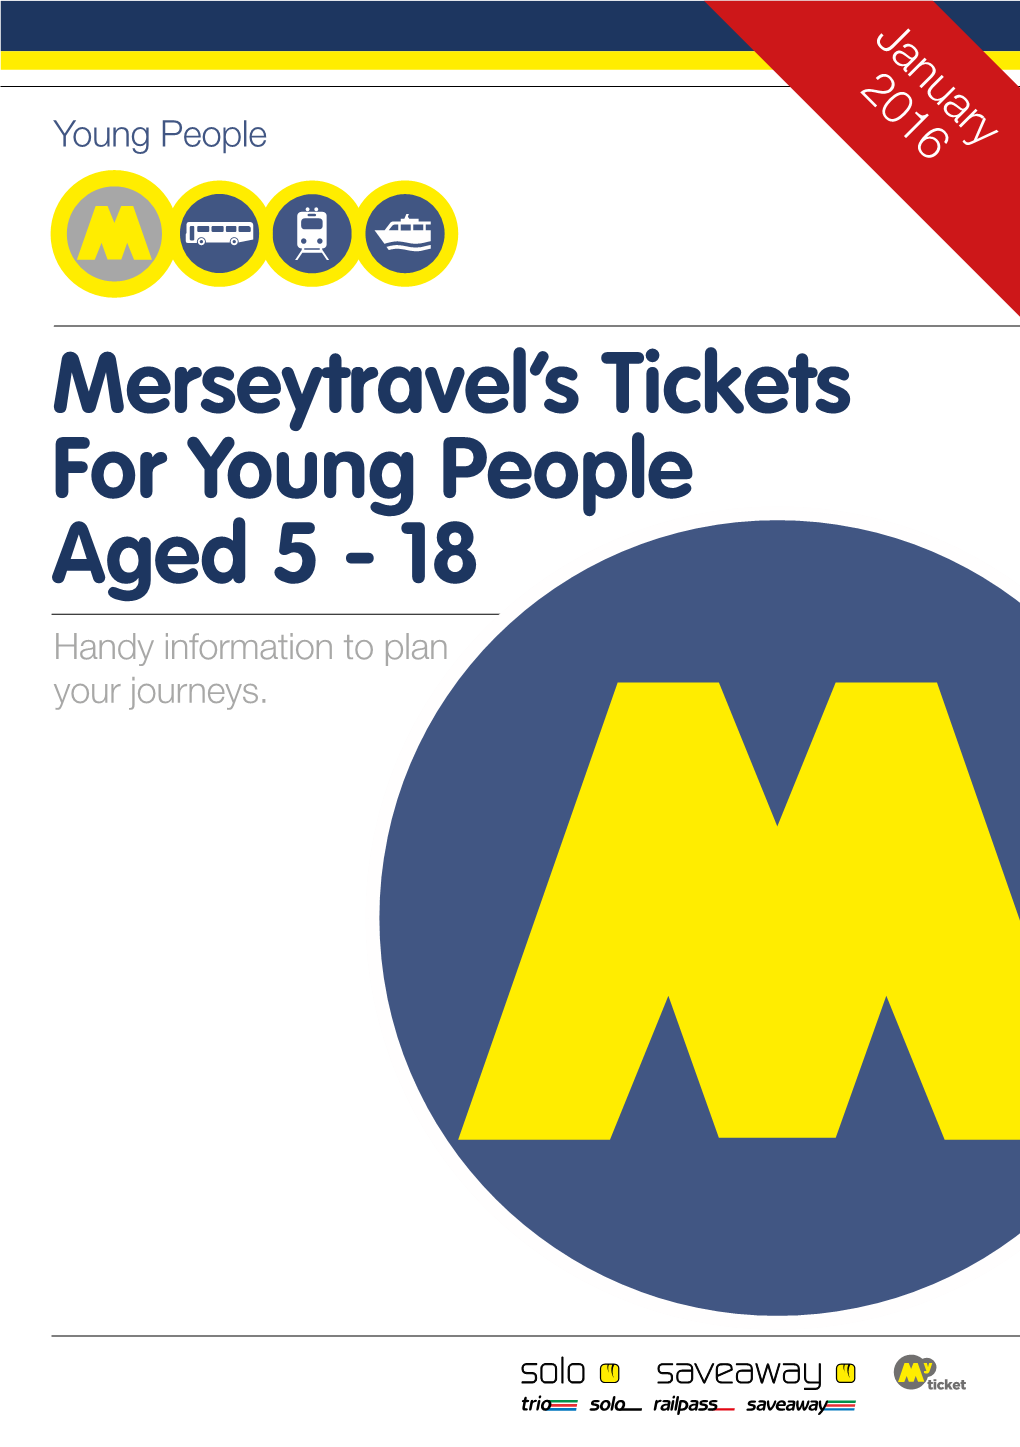 Merseytravel's Tickets for Young People Aged 5